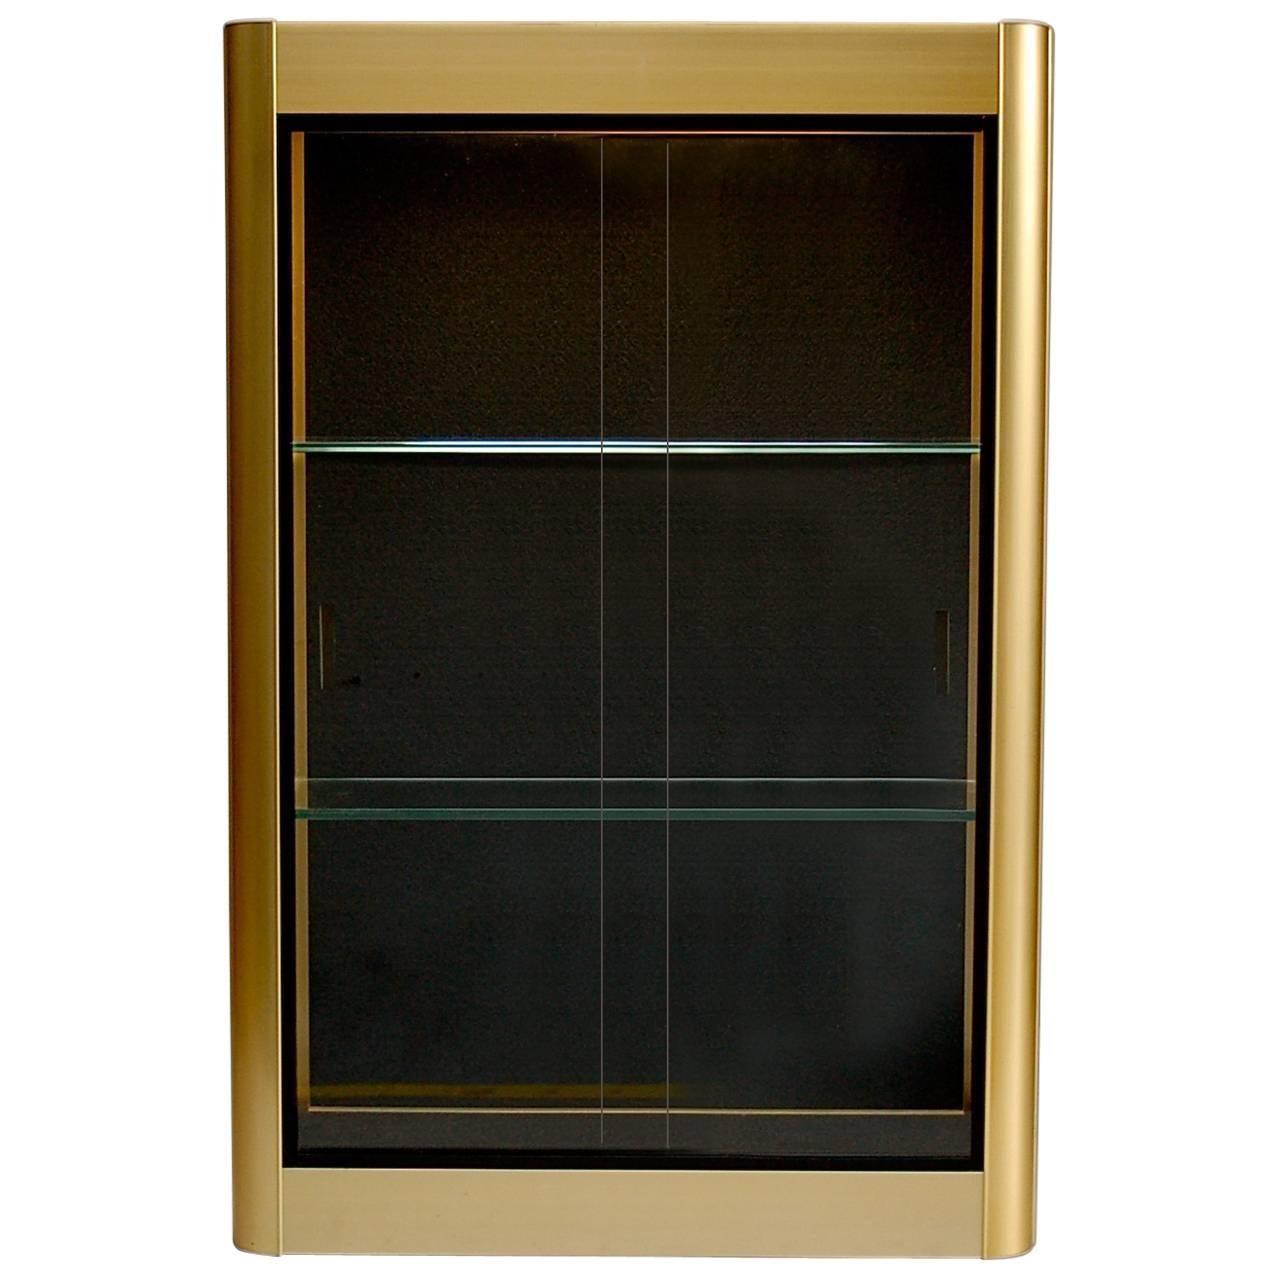 Gold Colored Wall Display Cabinet or Vitrine with Sliding Glass Doors, 1970s